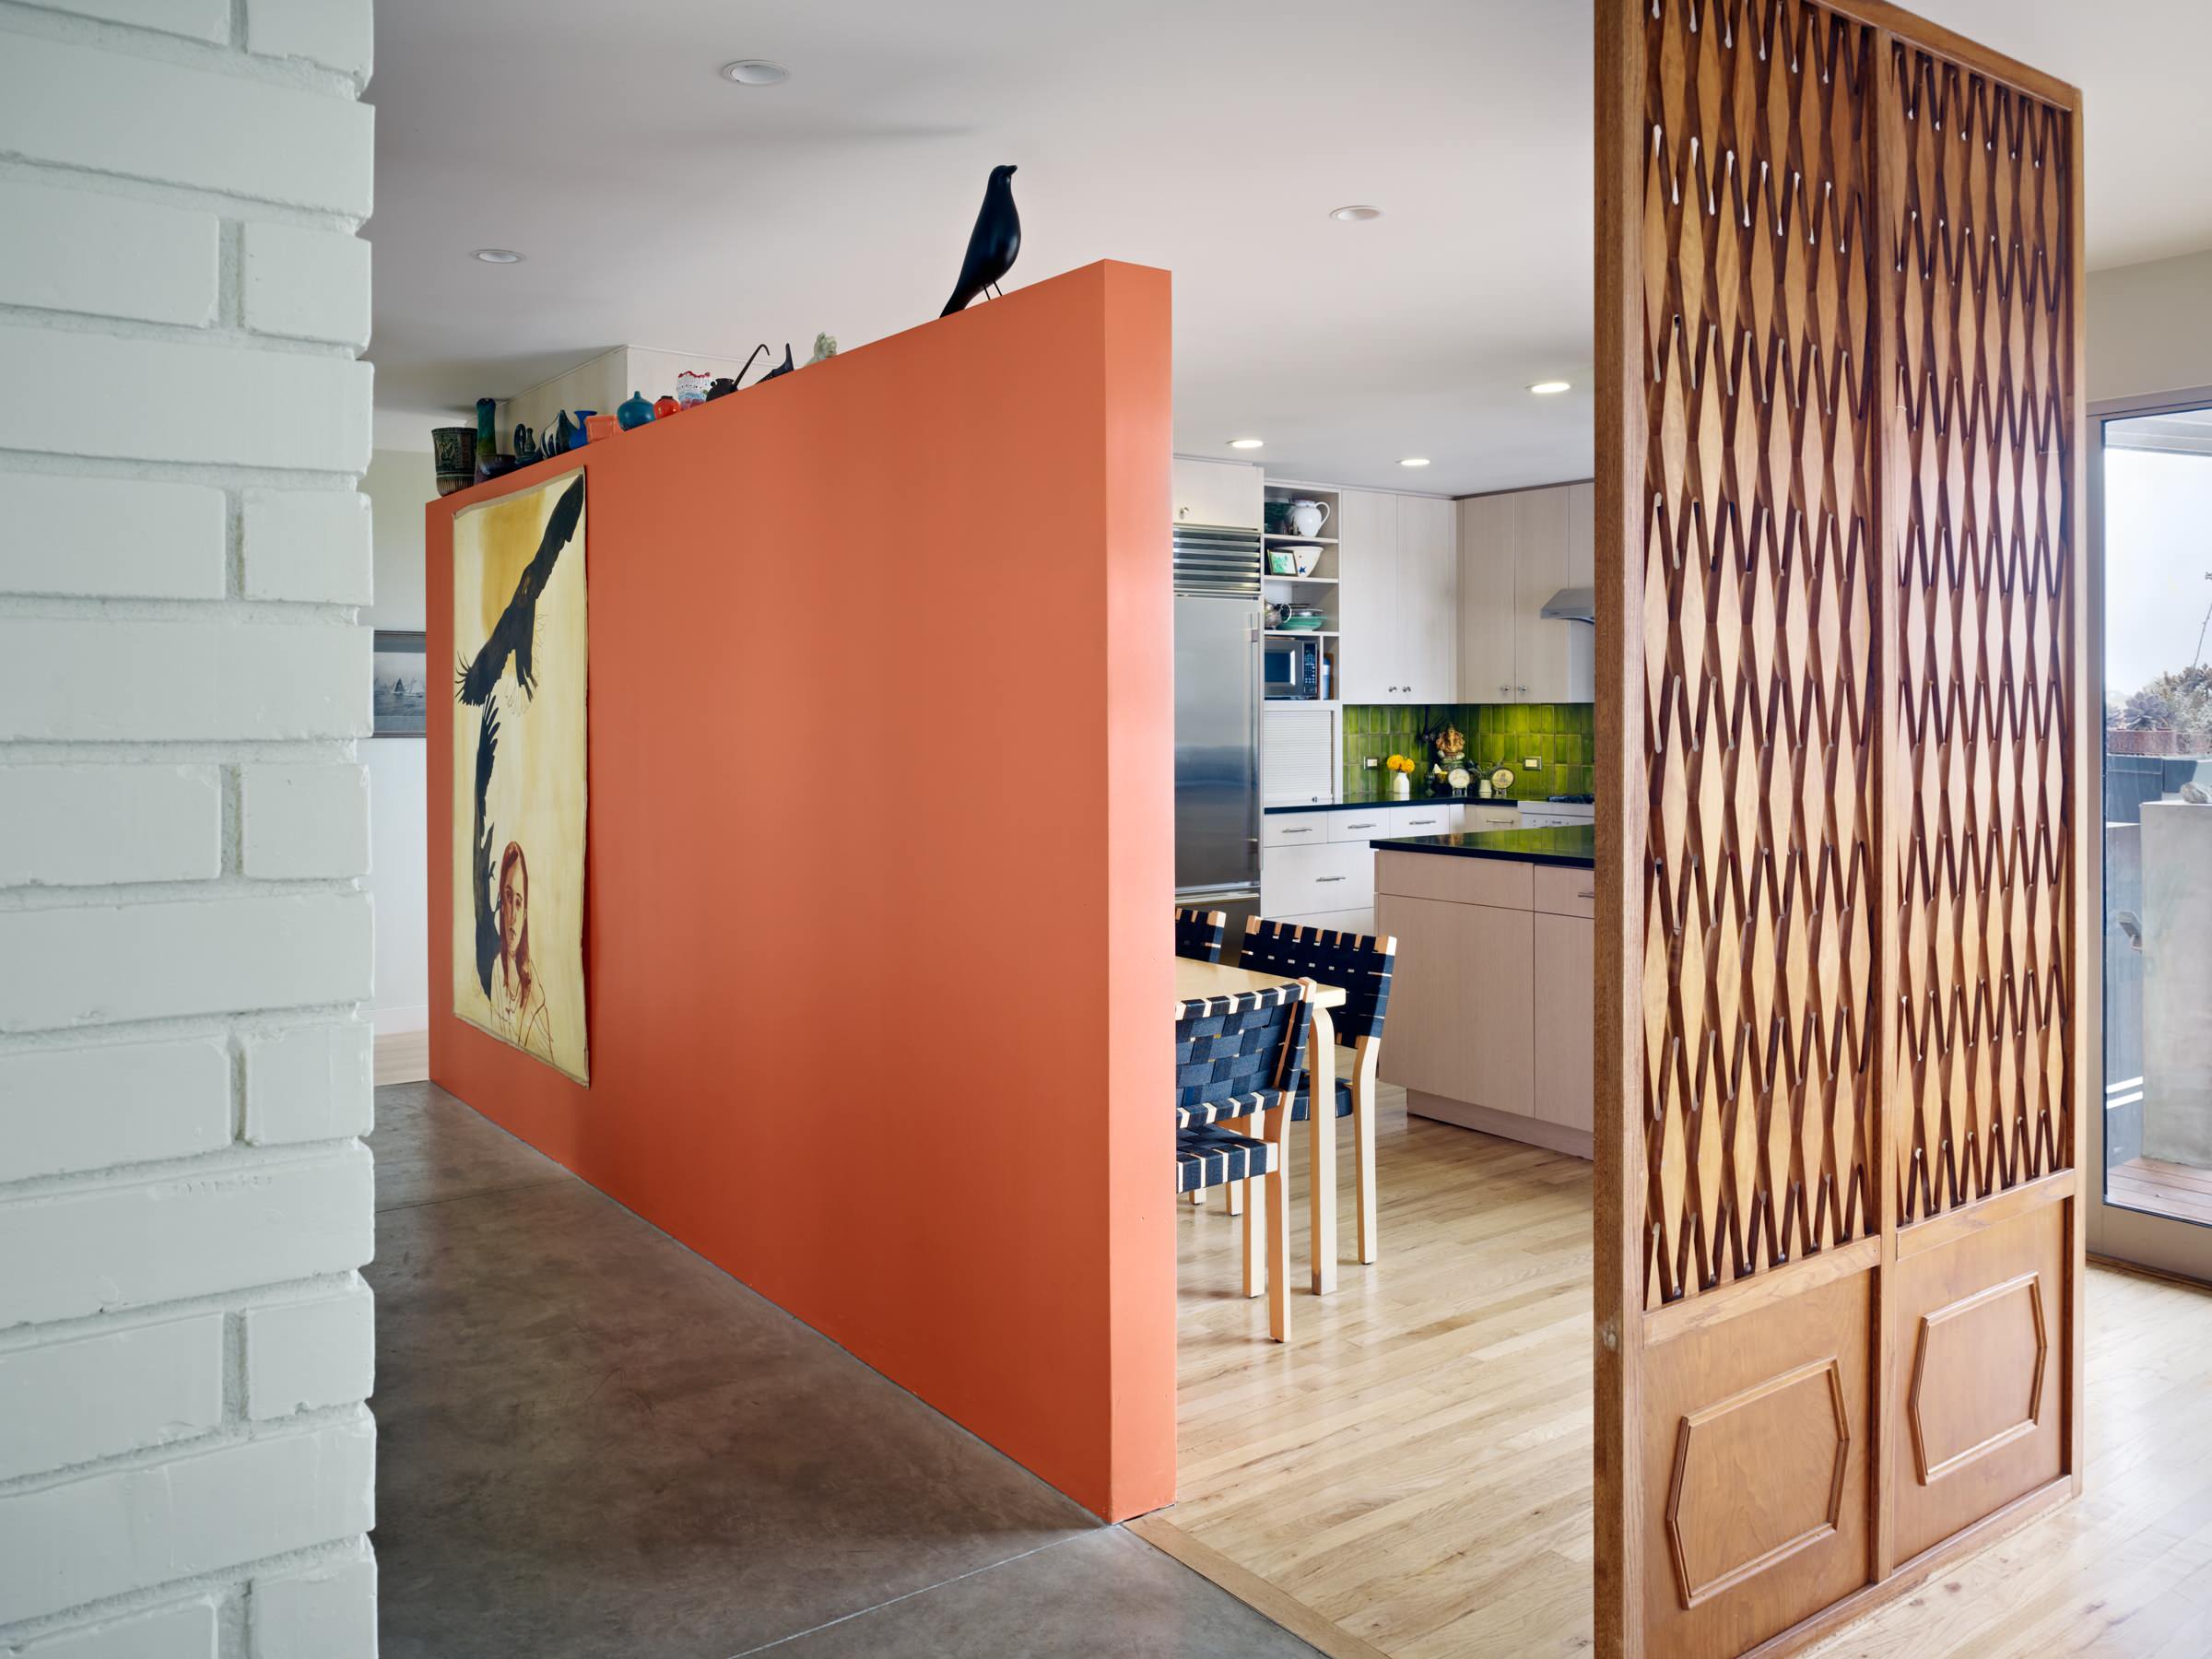 Wood Partition Wall - Photos & Ideas | Houzz